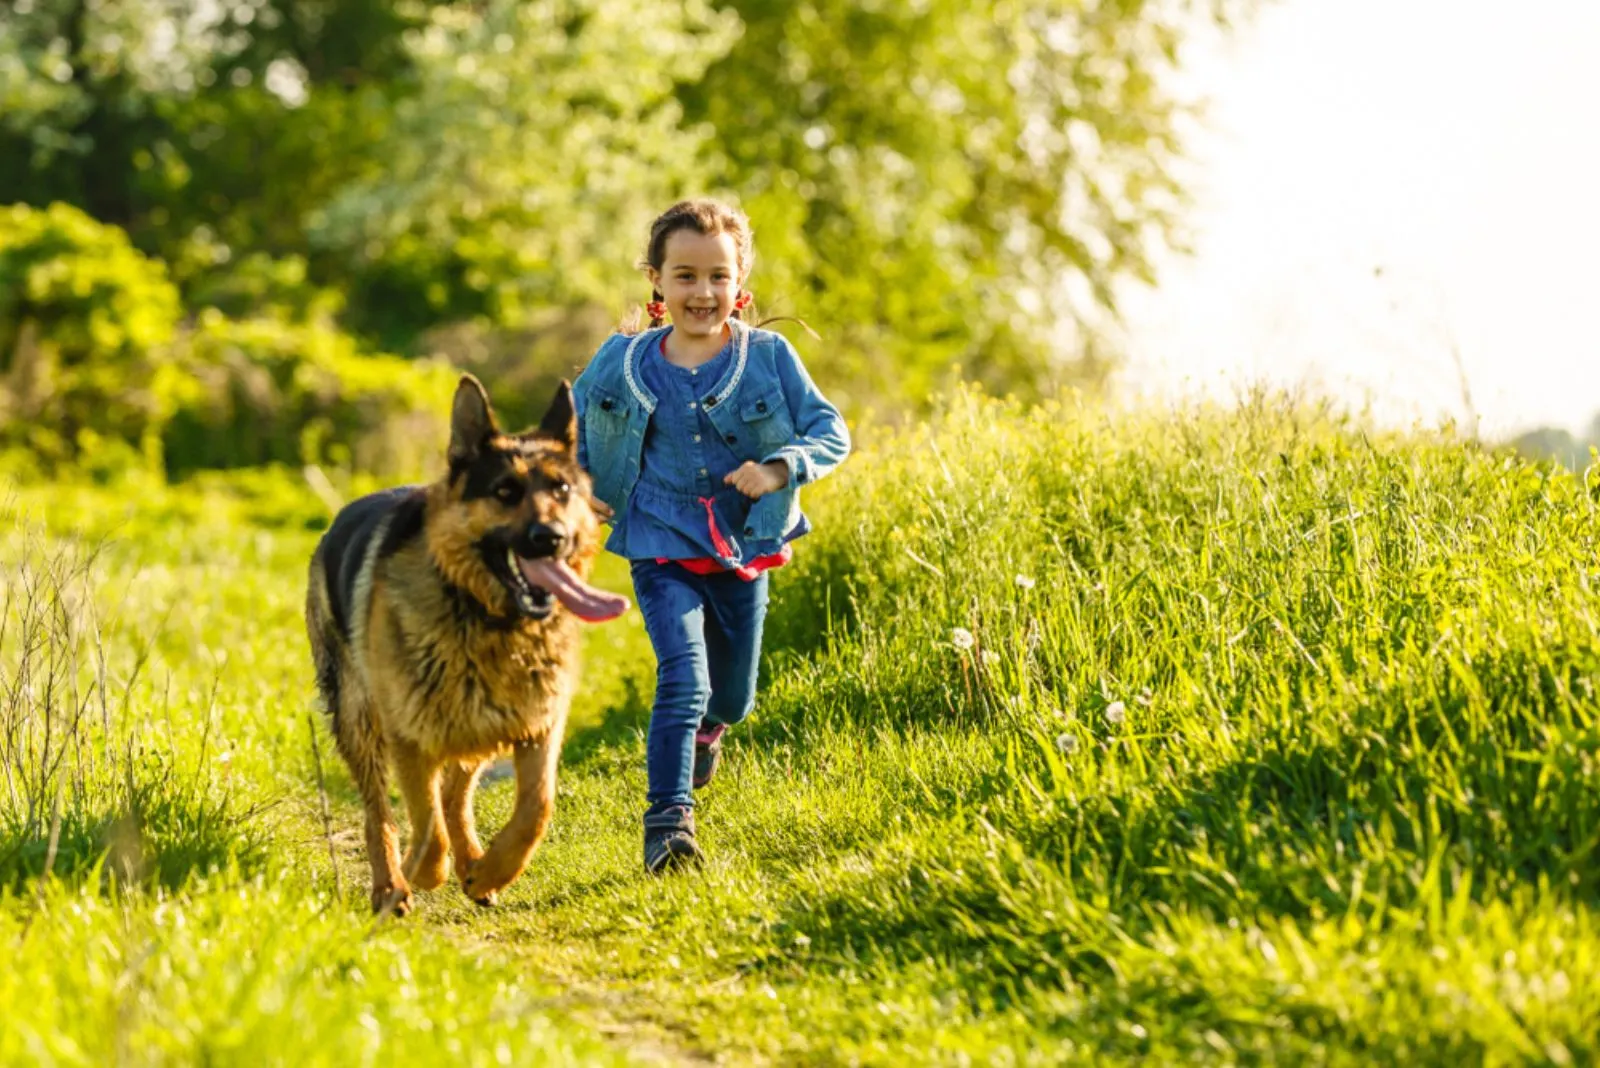 beautiful little girl with a german shepherd playing on the lawn at the day time